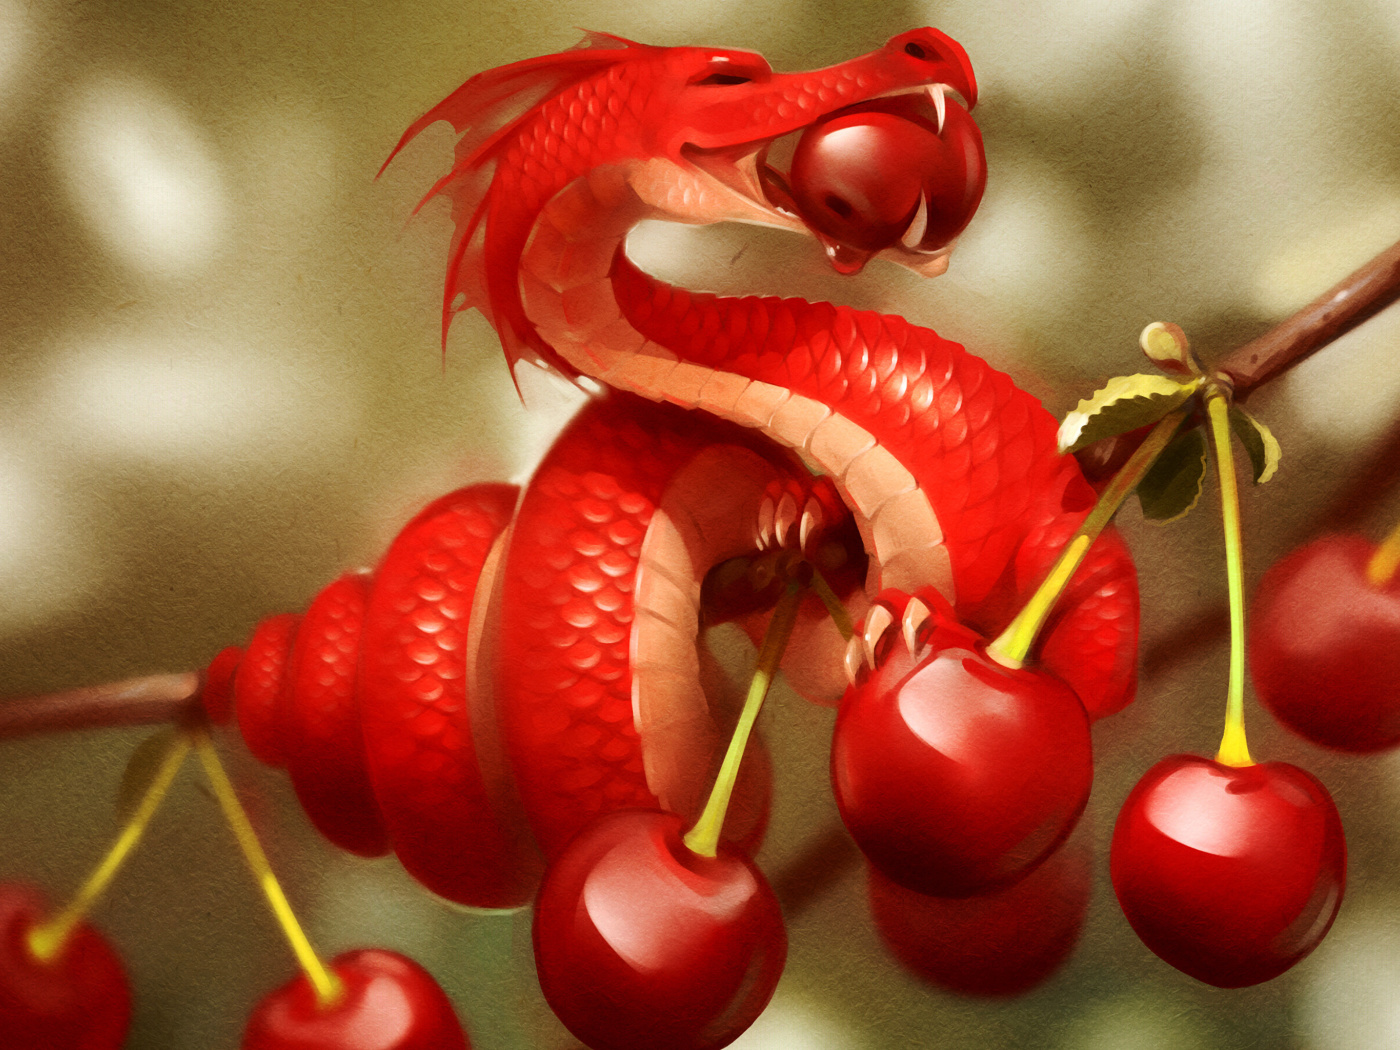 Dragon with Cherry wallpaper 1400x1050